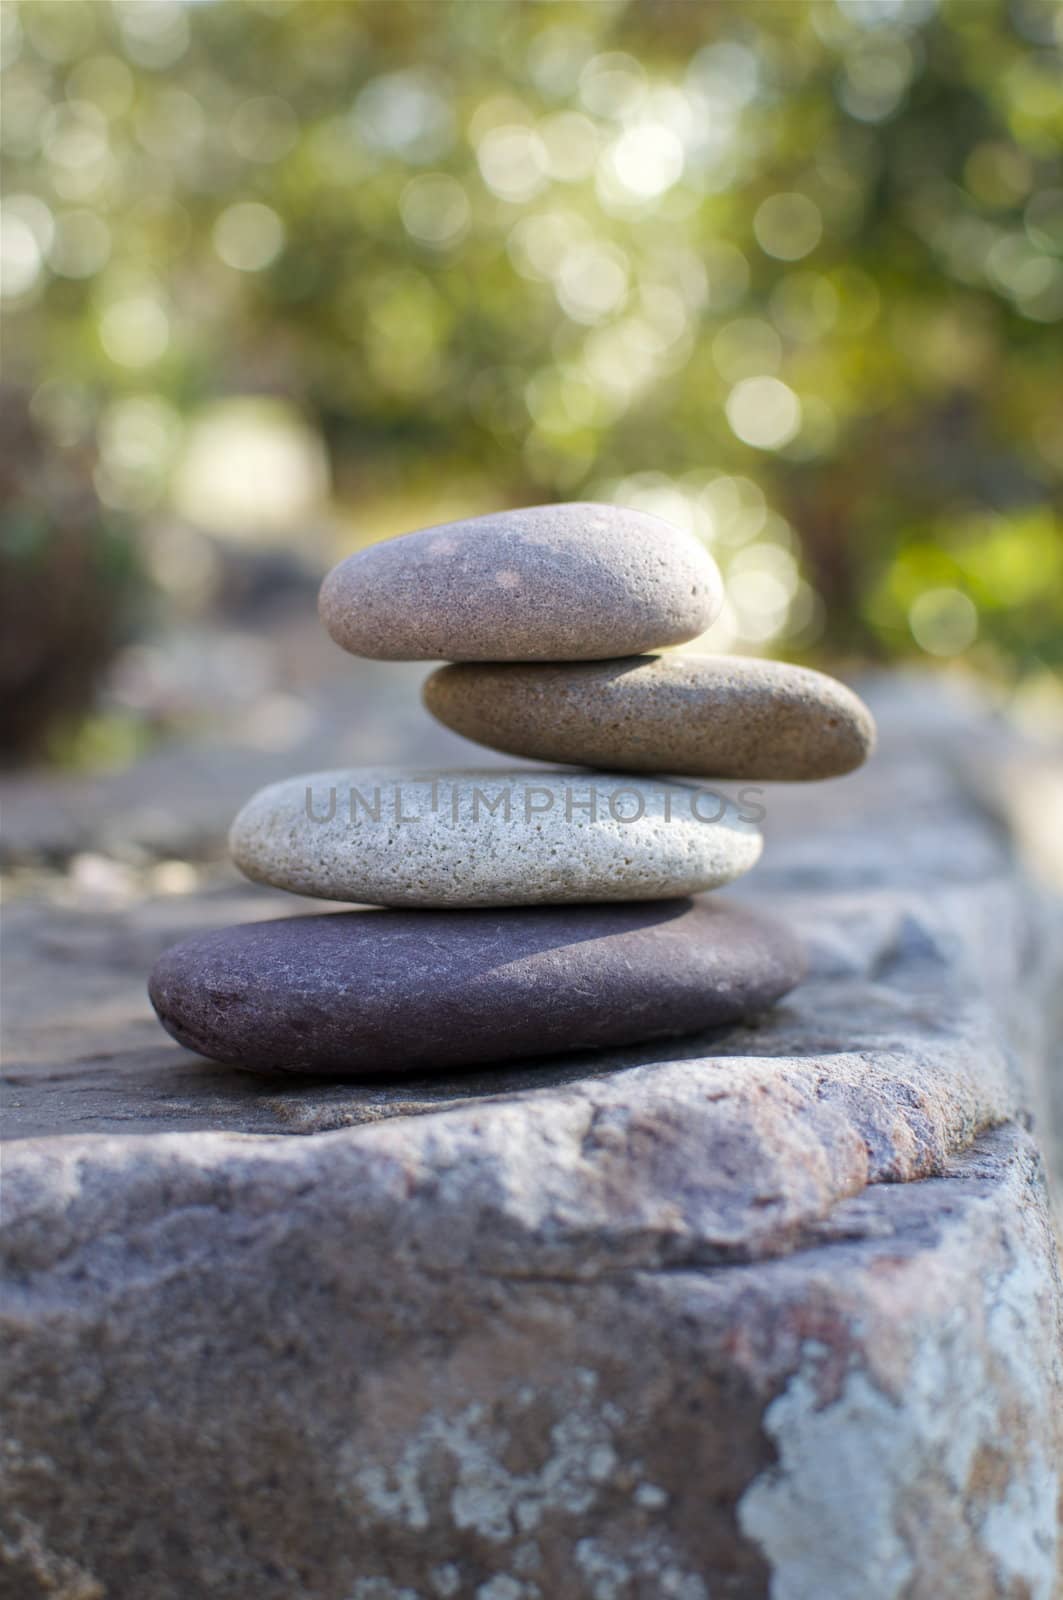 A stack of smooth, round stones evokes a zen feeling.